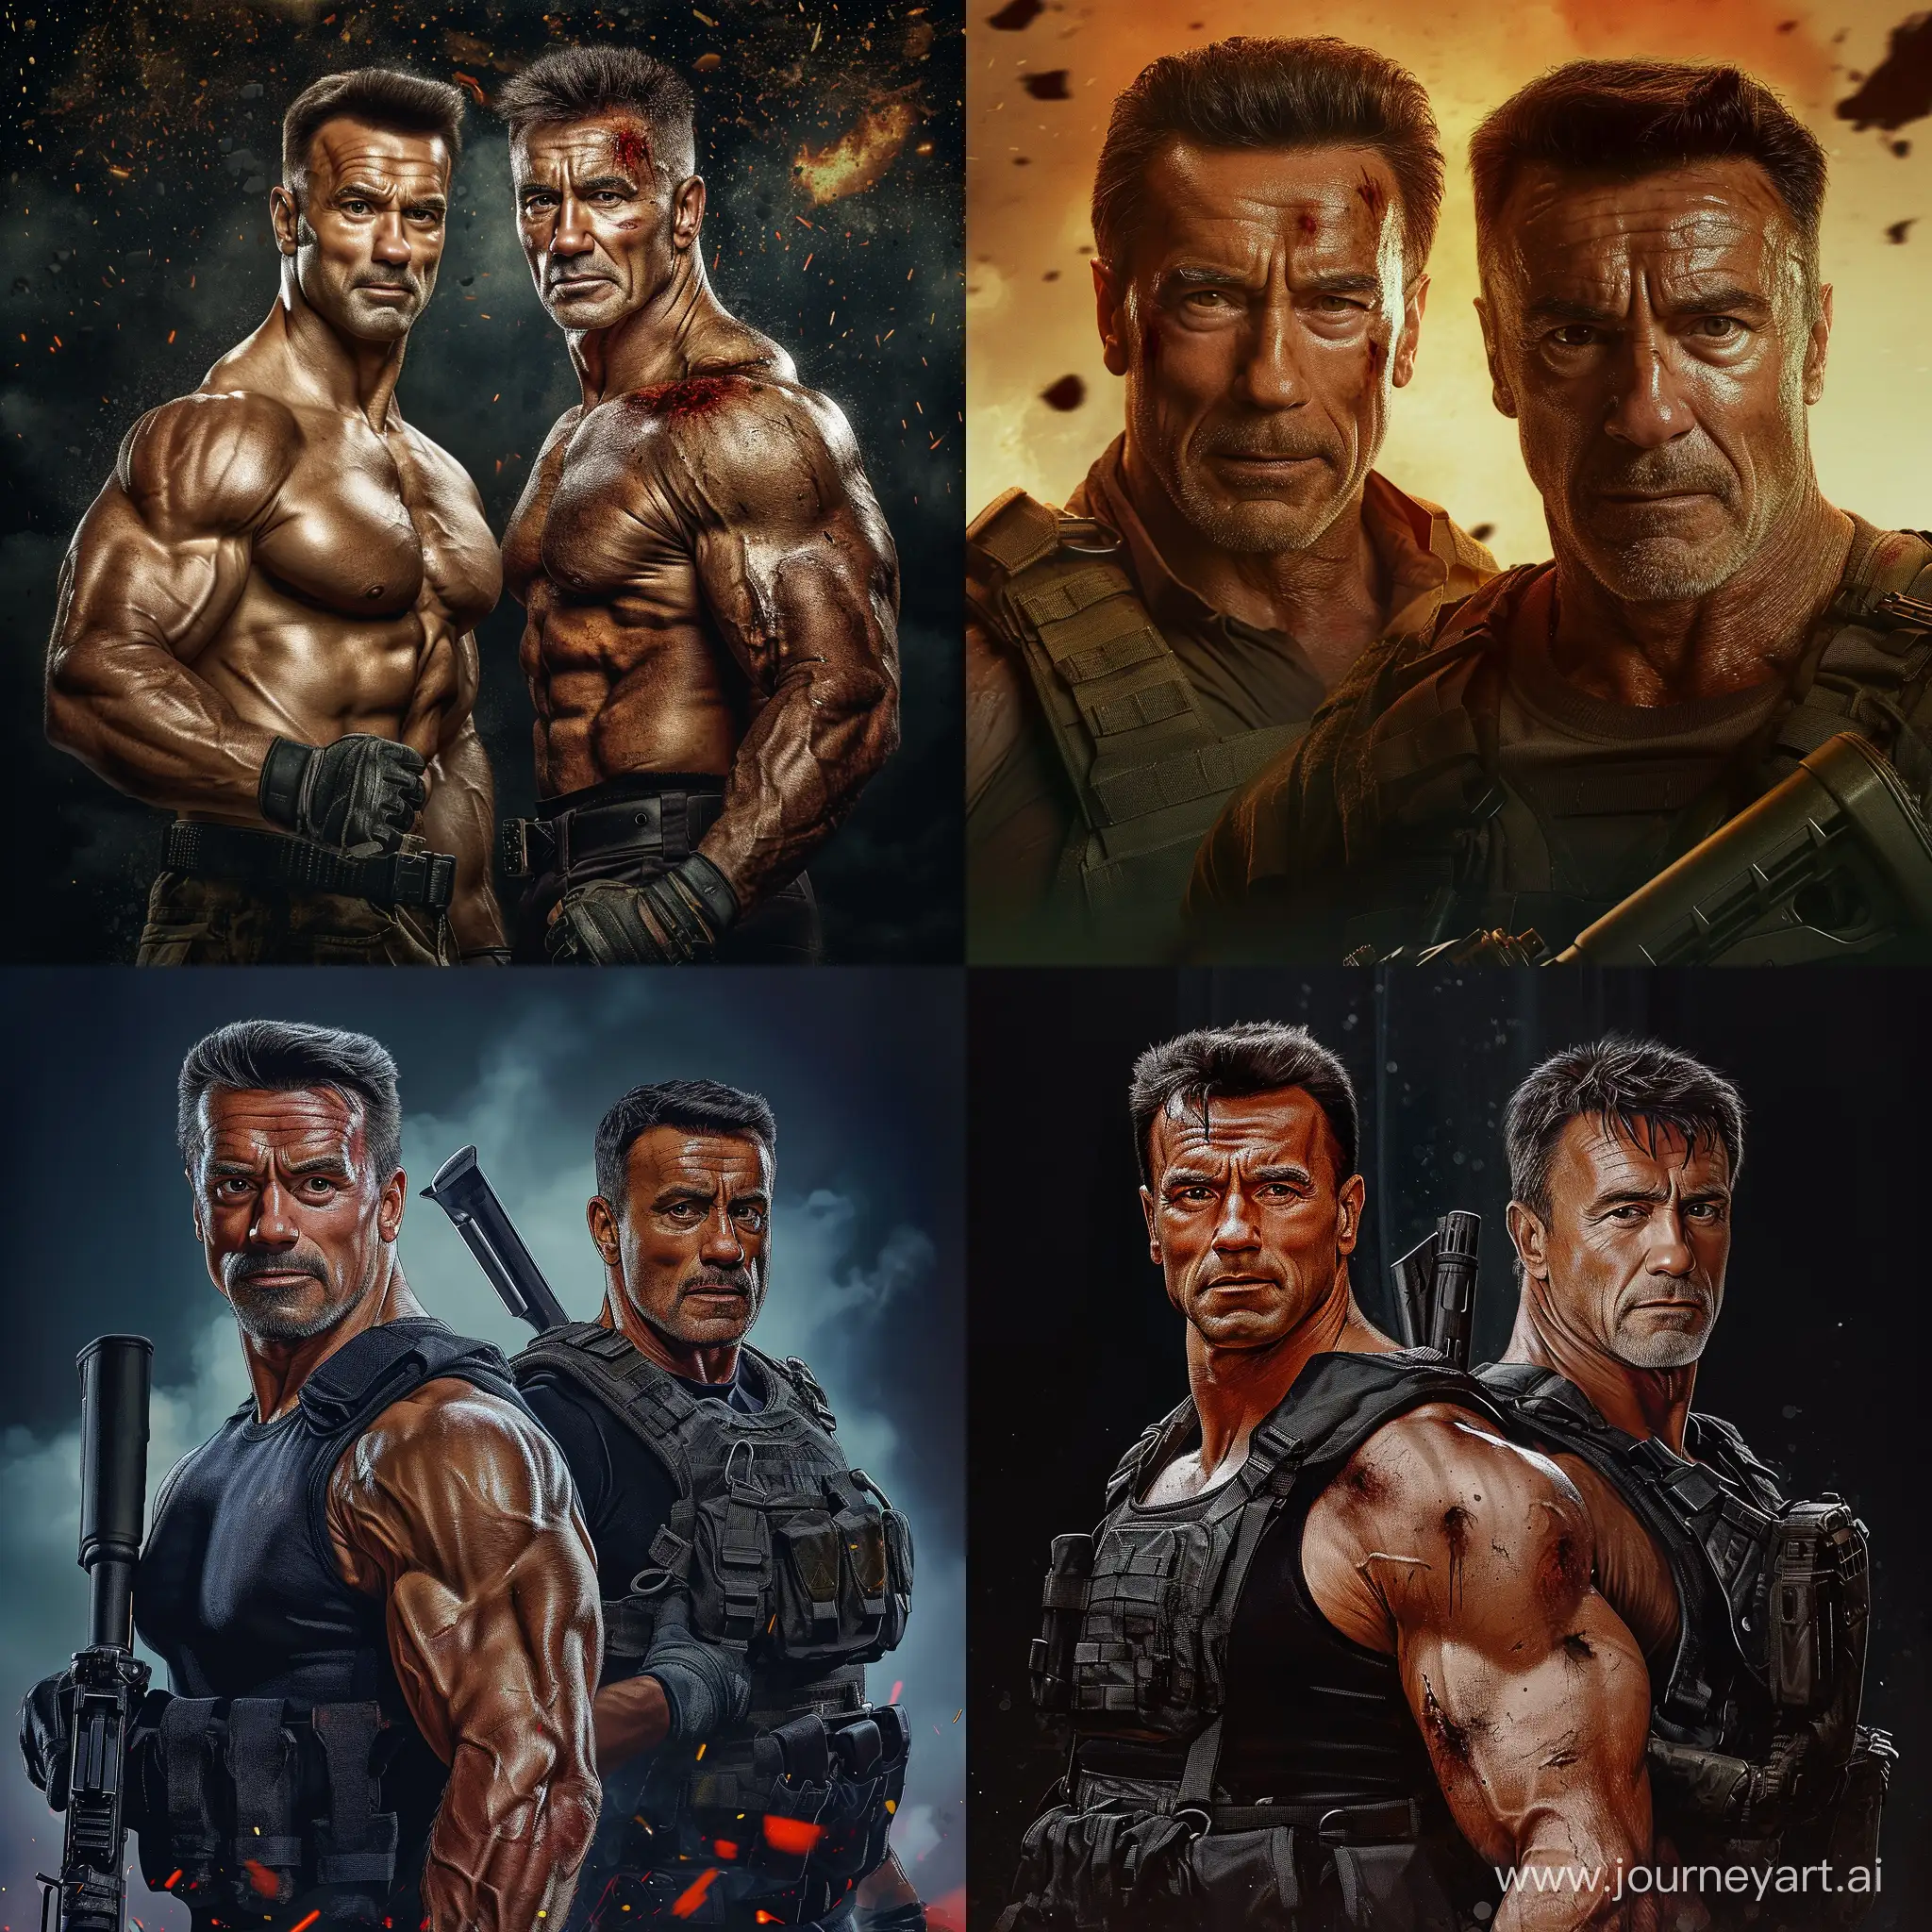 Ultimate-Action-Hero-Arnold-Schwarzenegger-and-Sylvester-Stallone-Mix